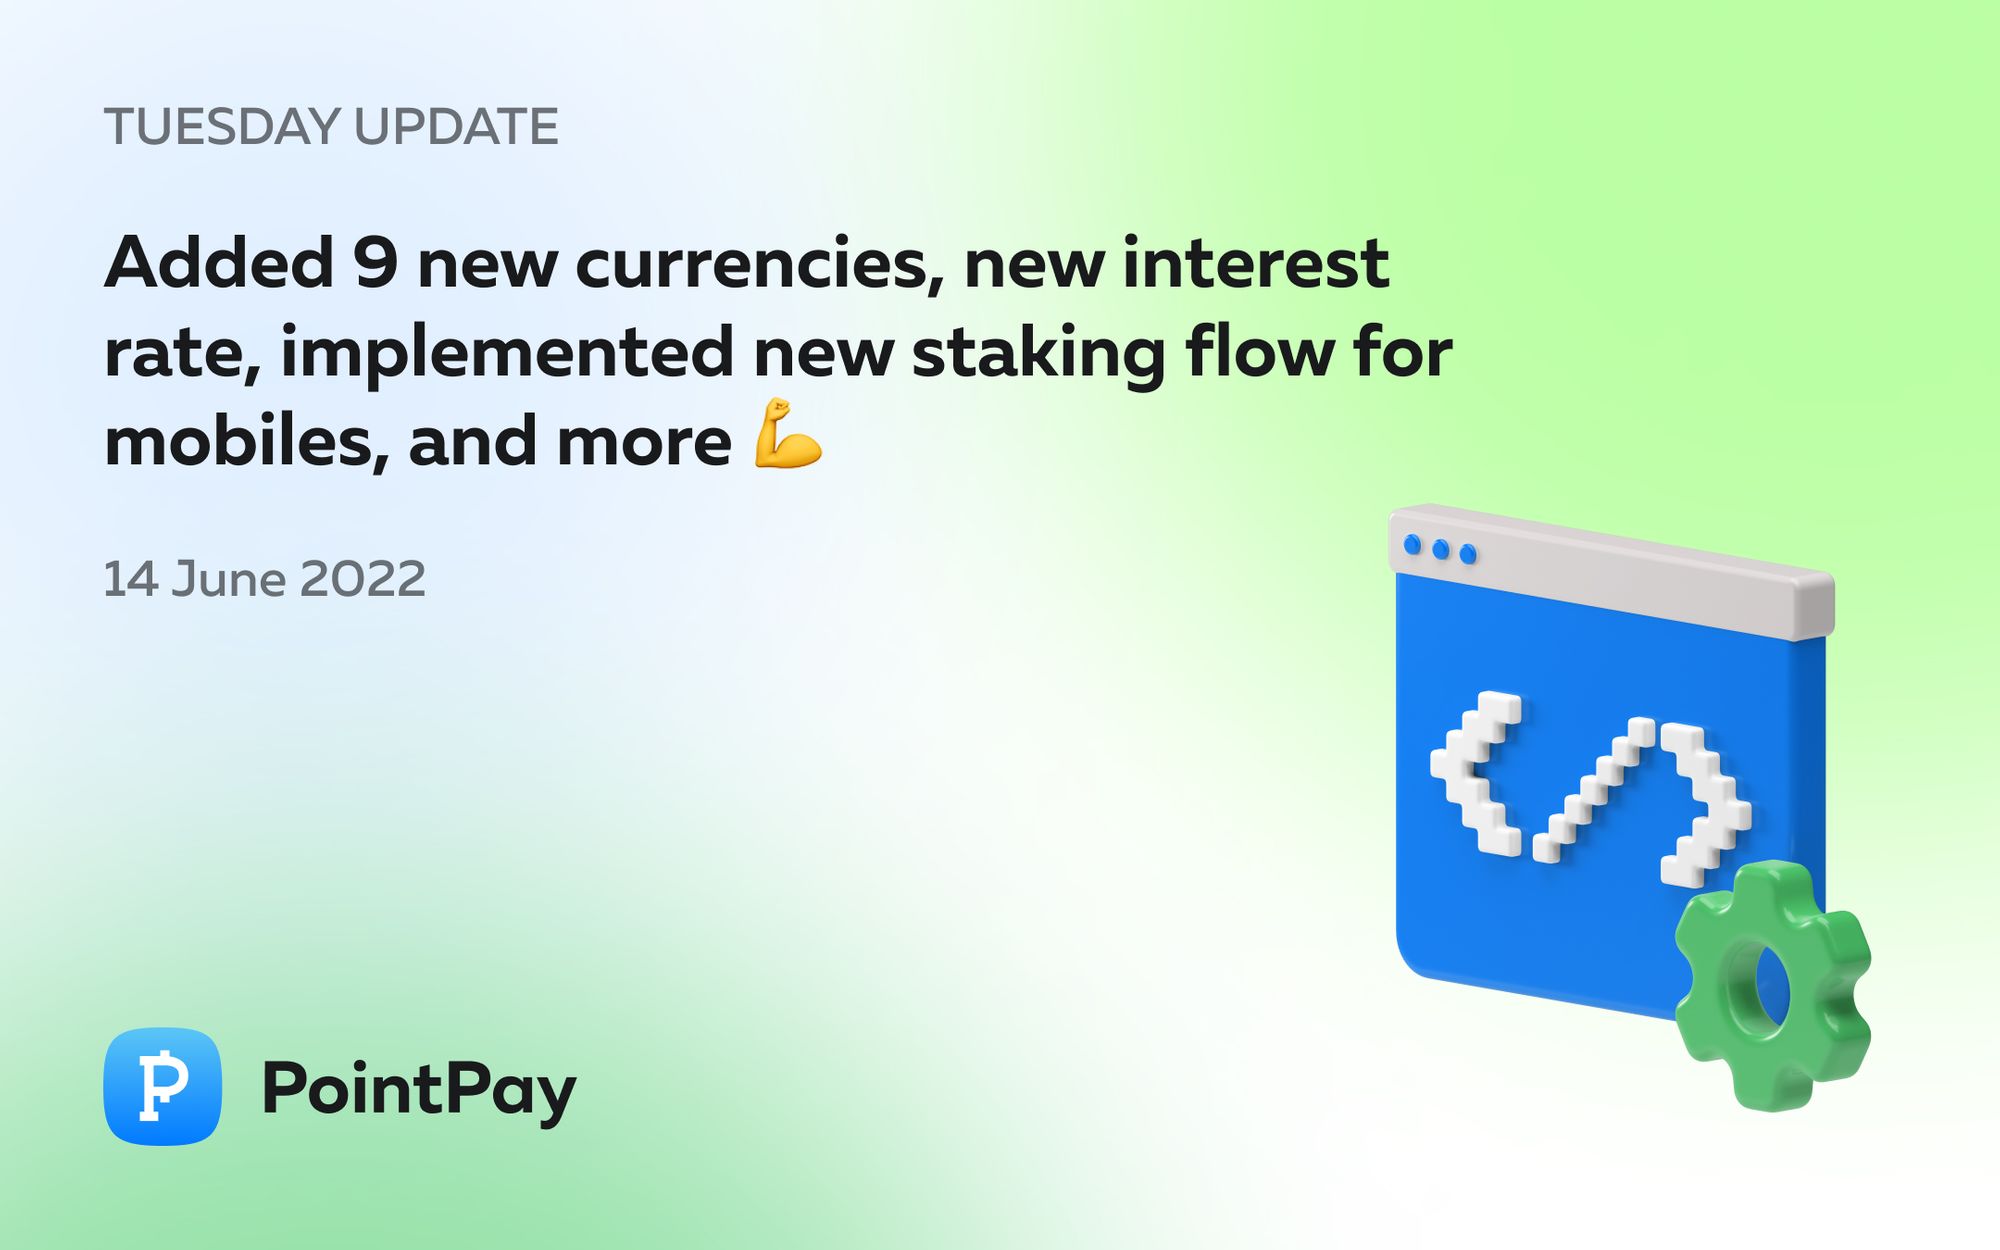 Tuesday update from PointPay